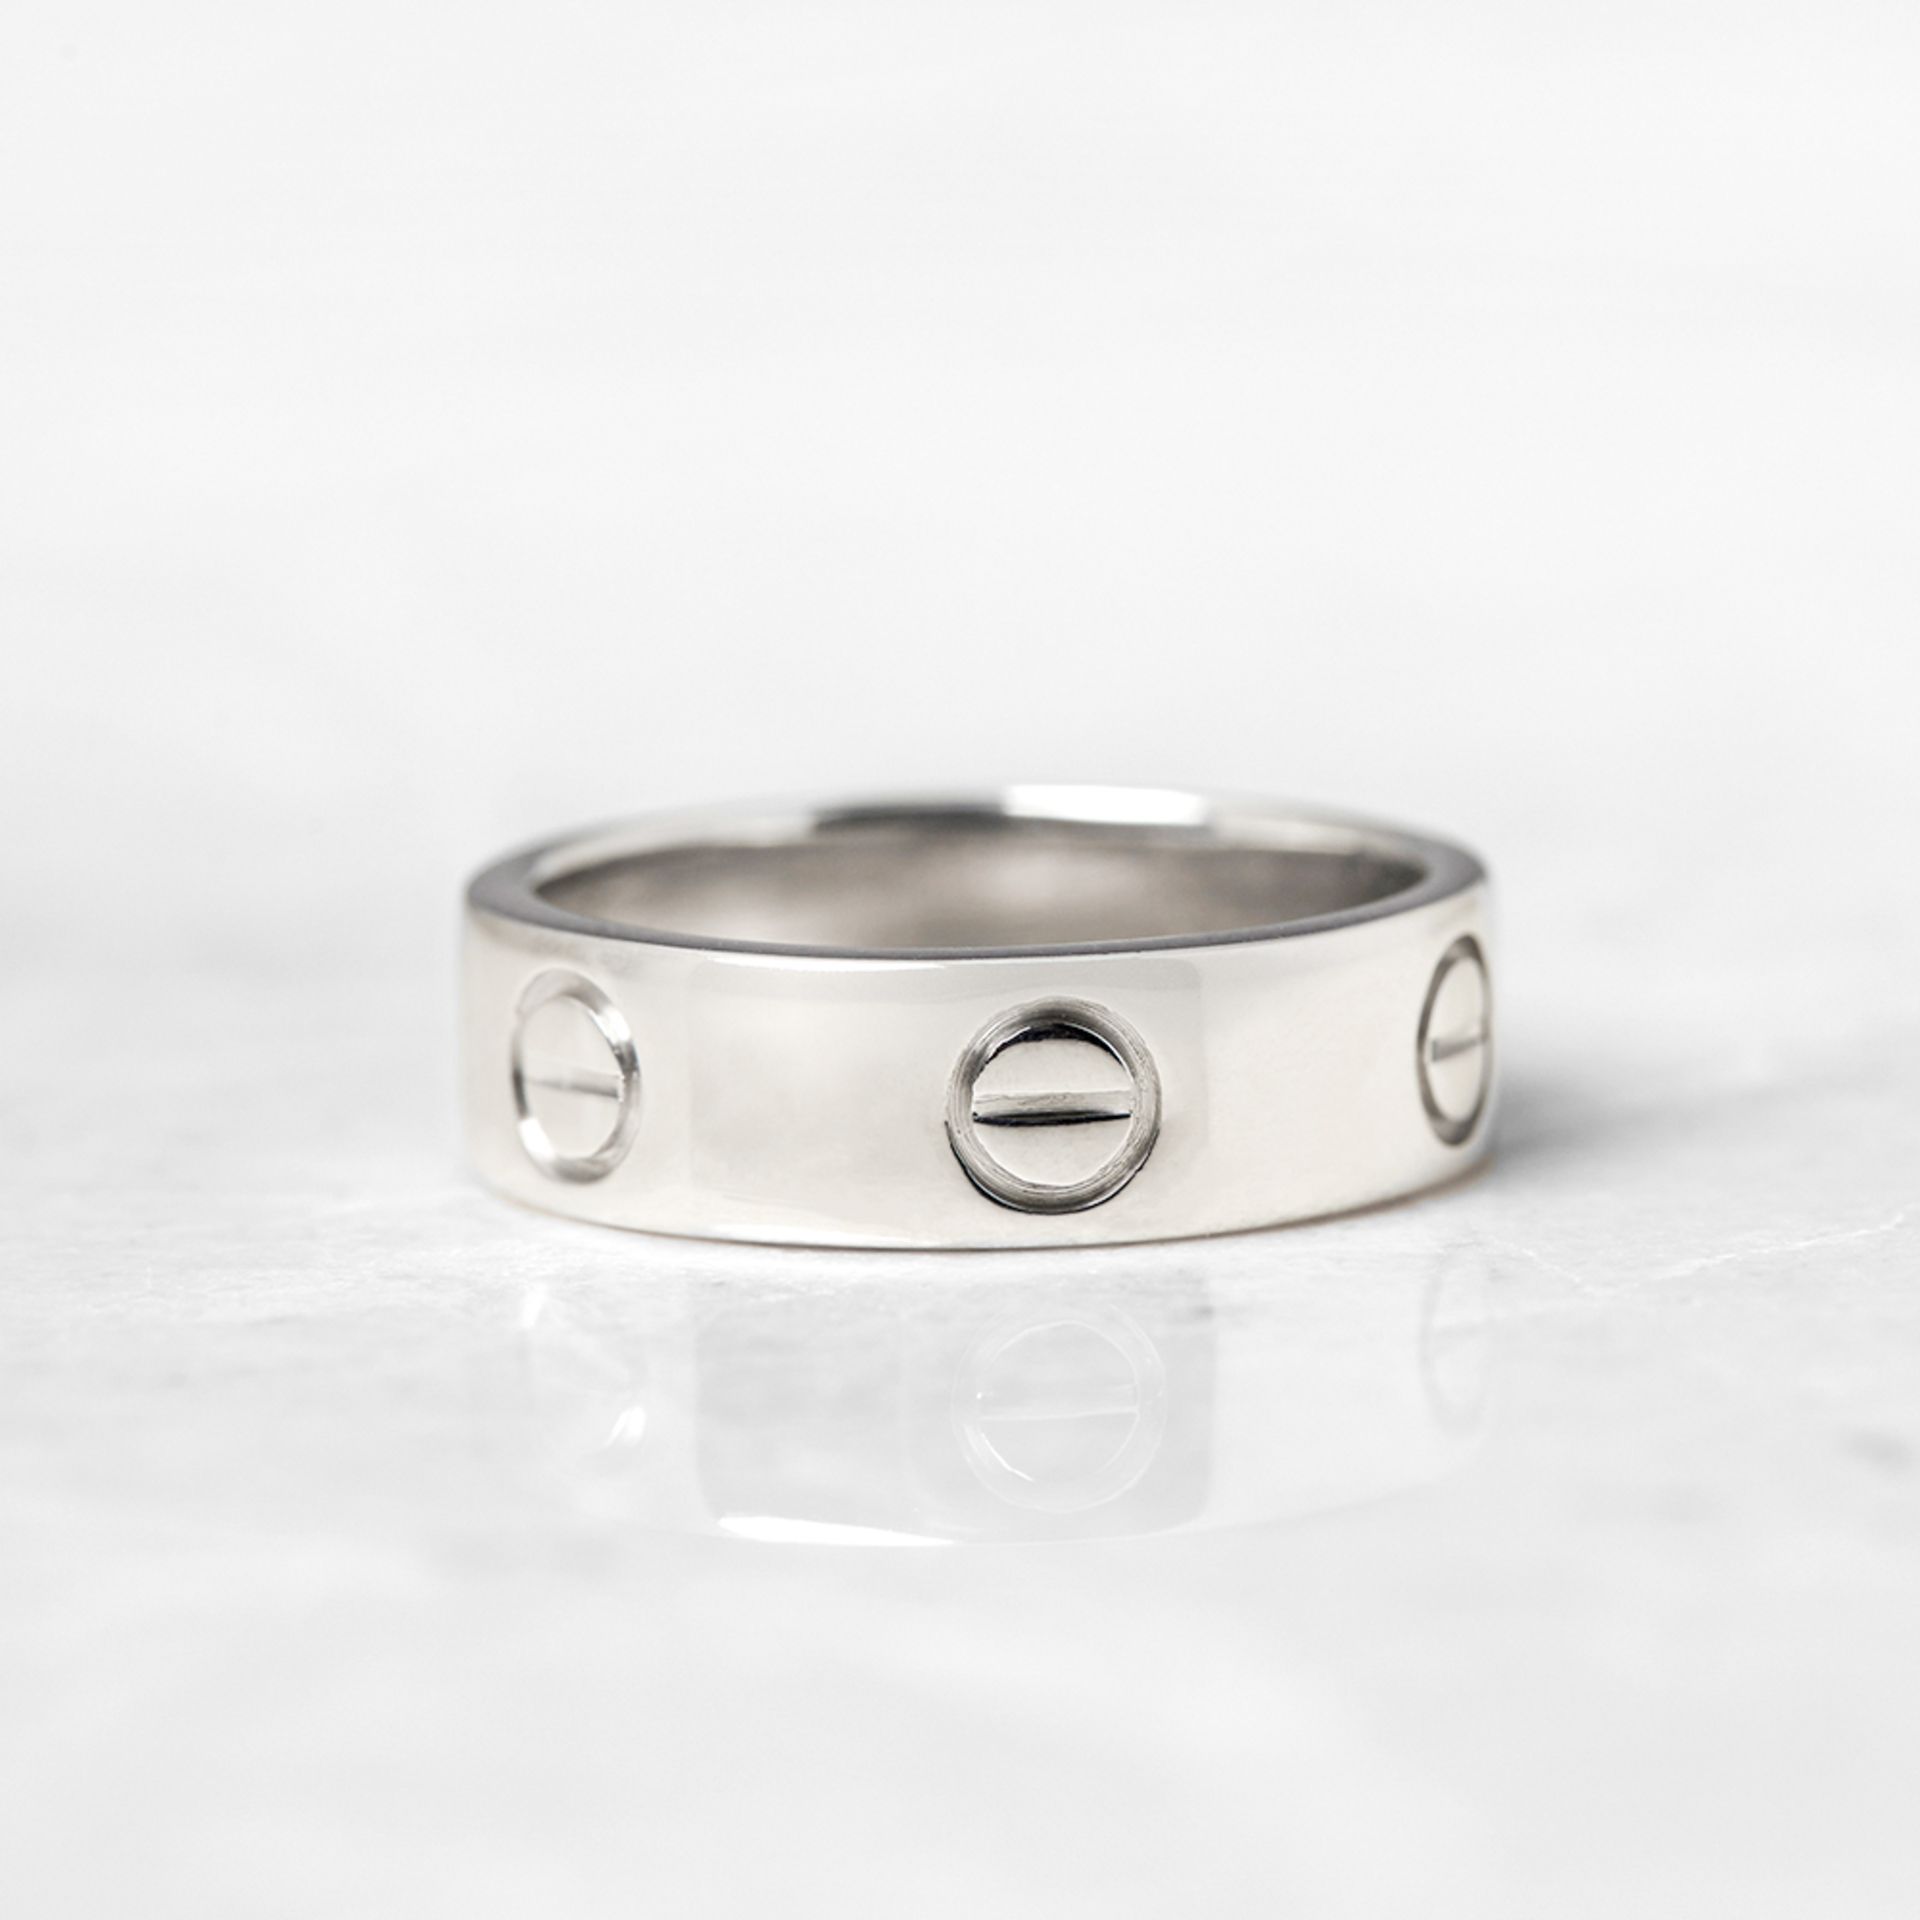 Cartier 18k White Gold Love Ring - Image 2 of 6